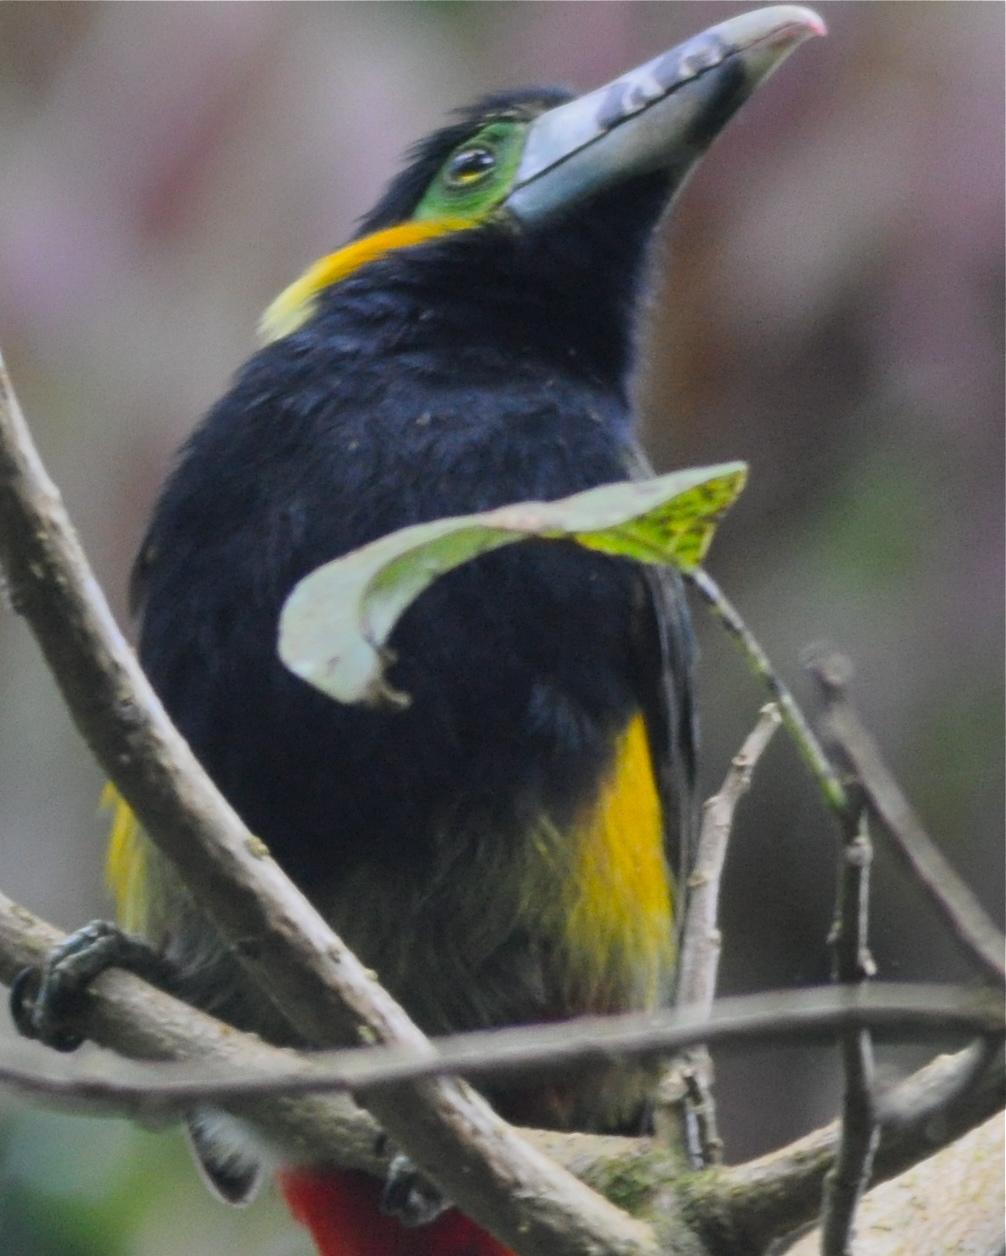 Spot-billed Toucanet Photo by Mary Sue Akin